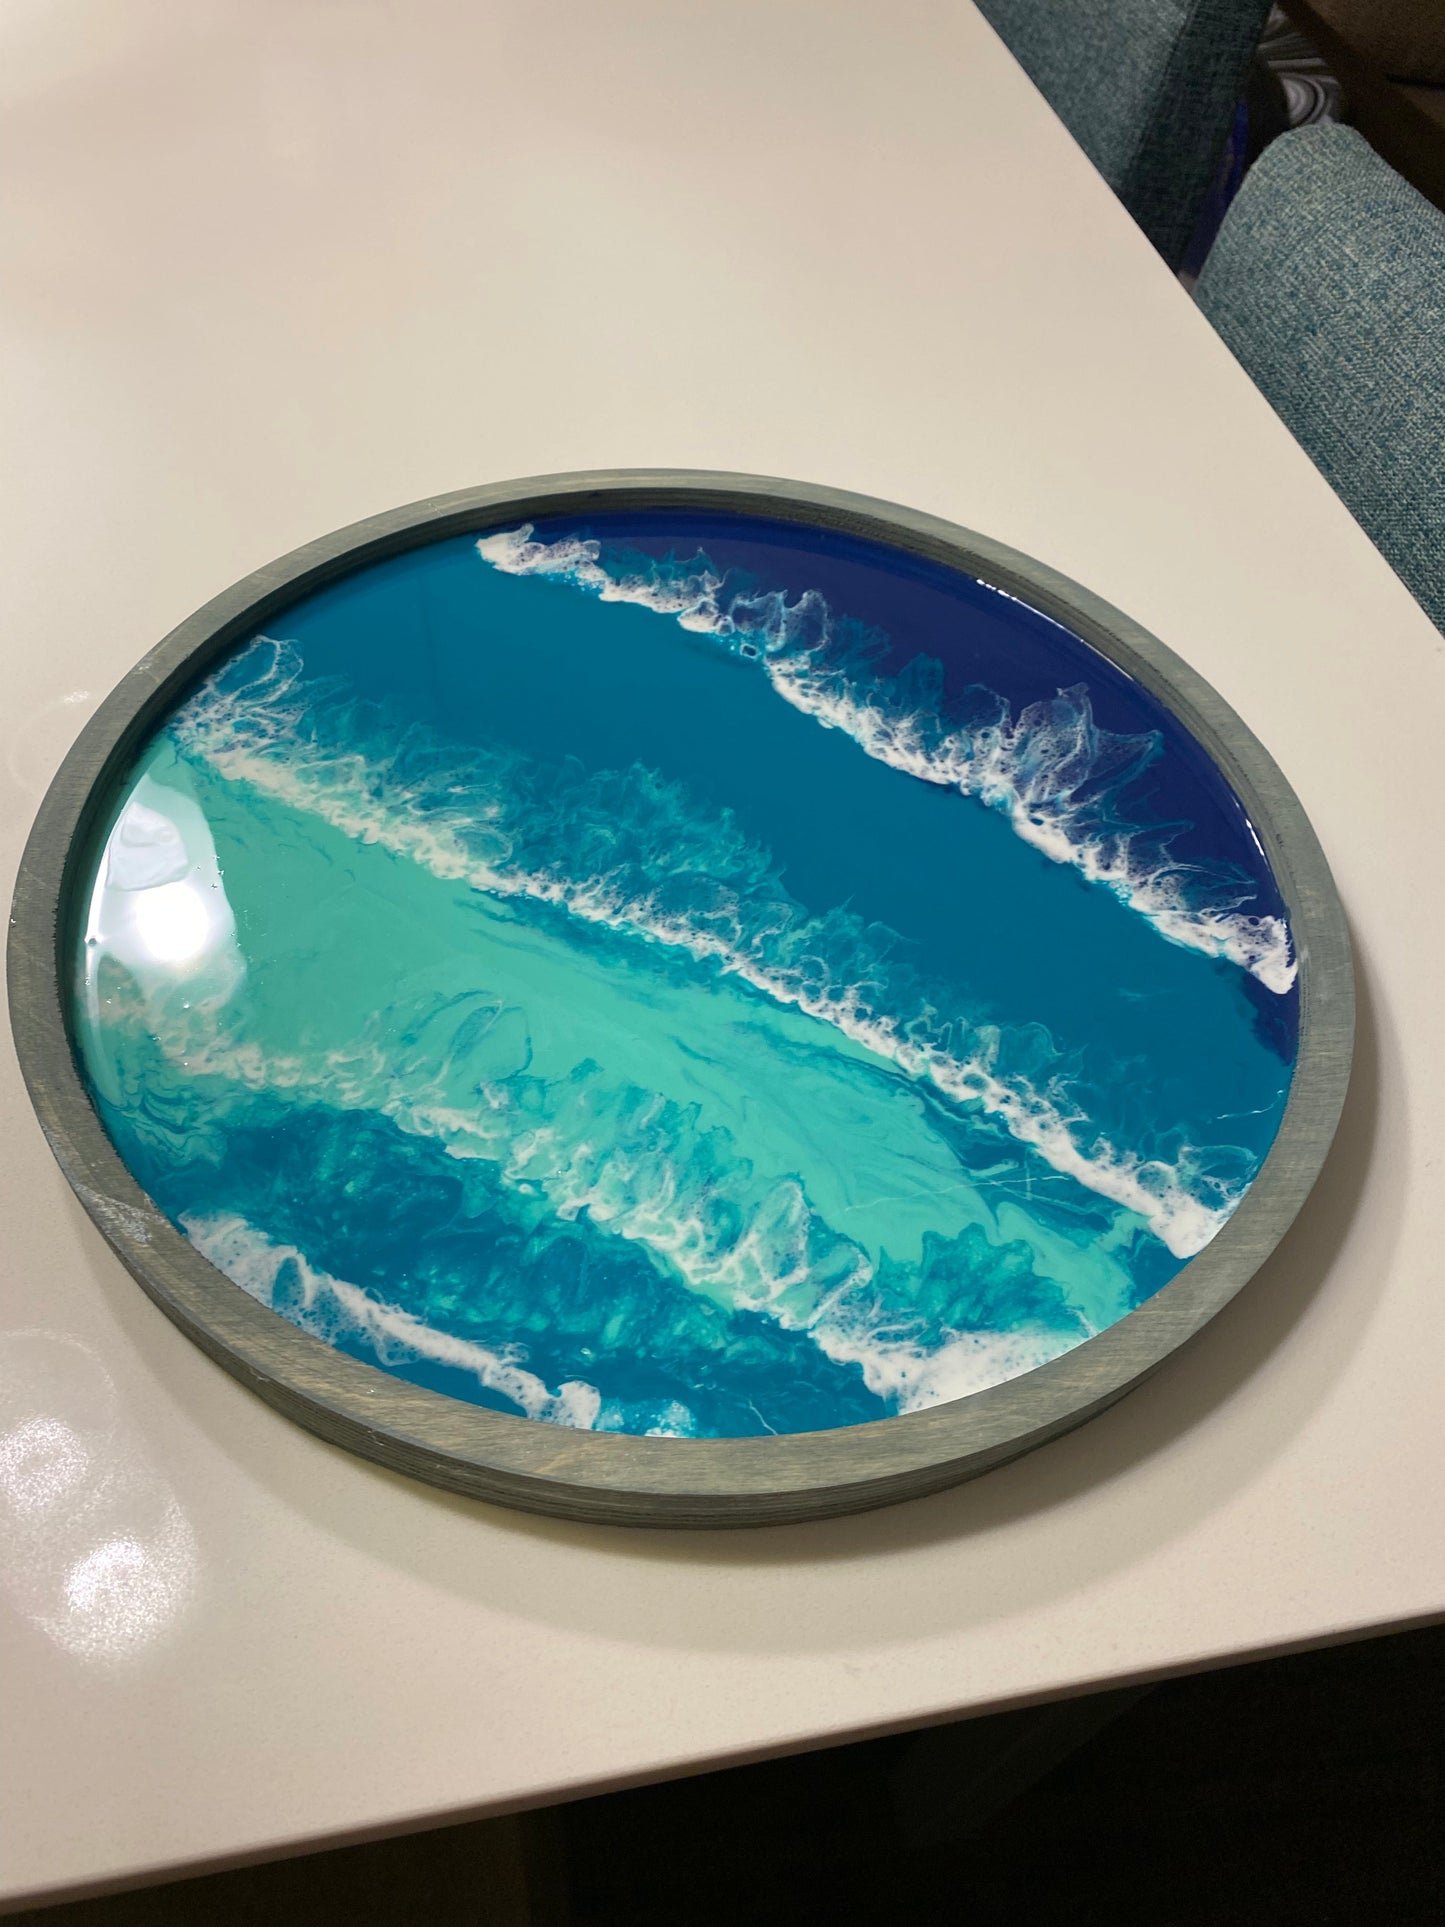 Beach Wave Resin Workshop: May 25 @ 10am